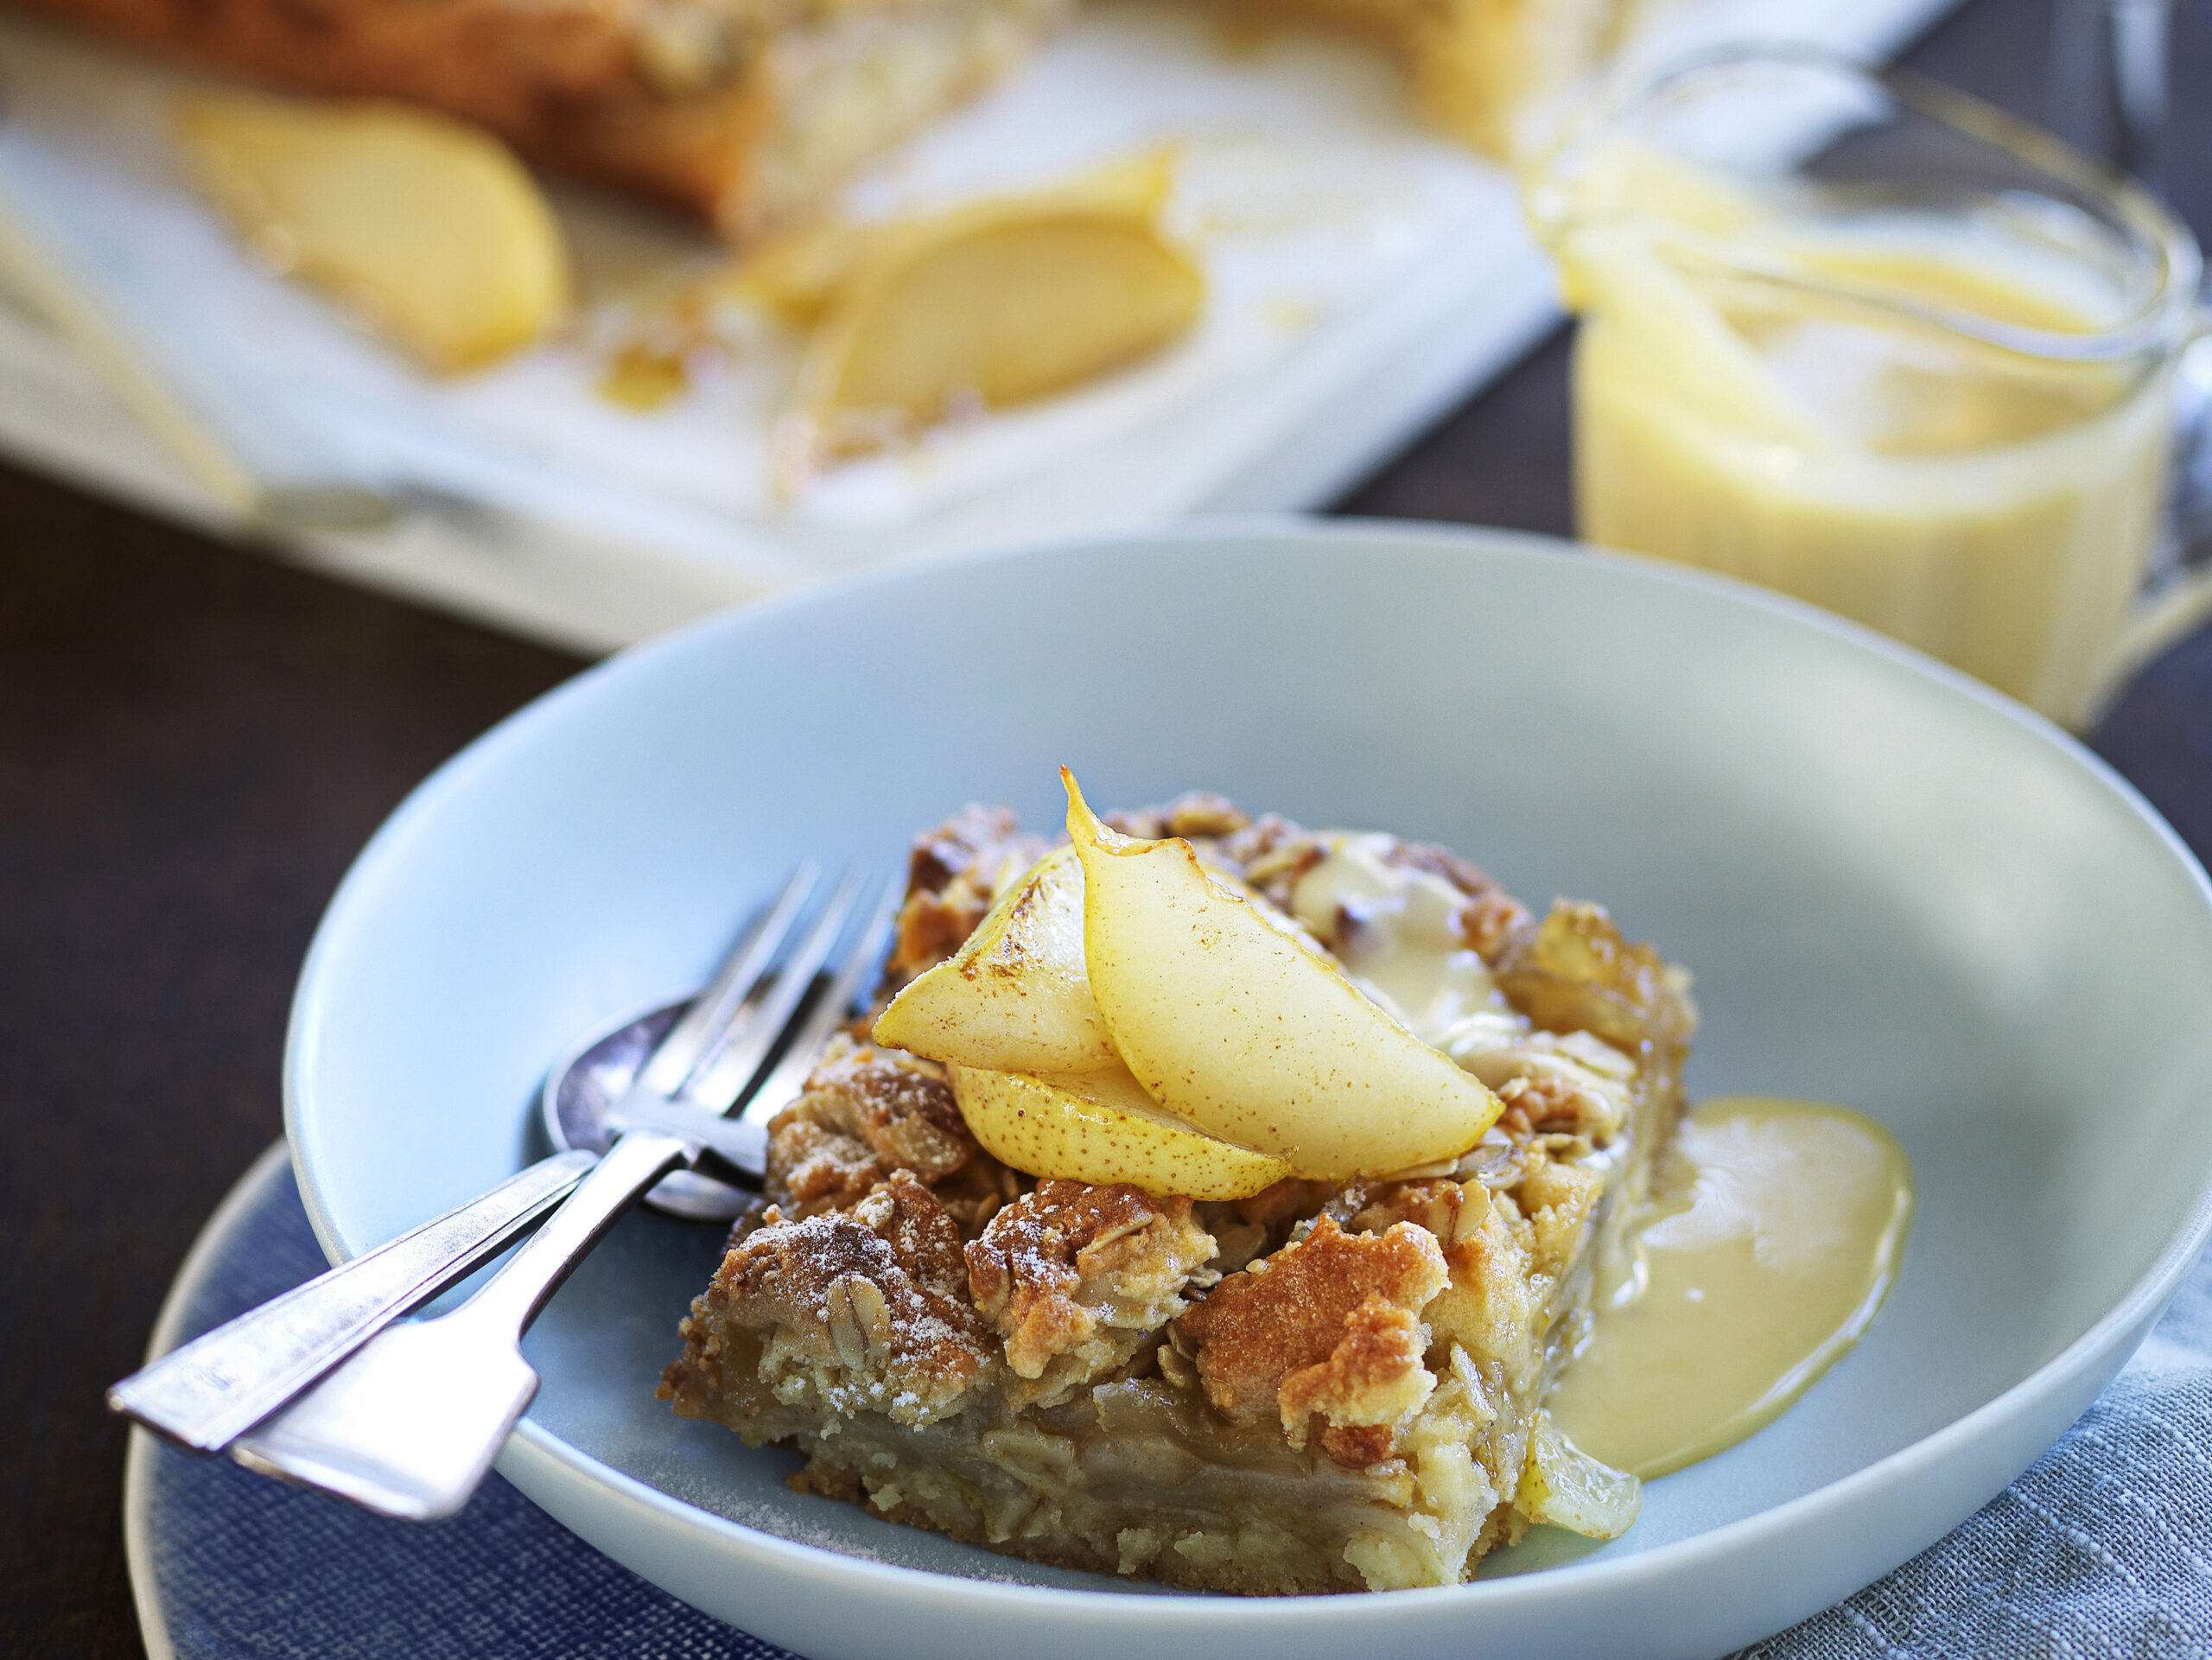 Pear and ginger crumble